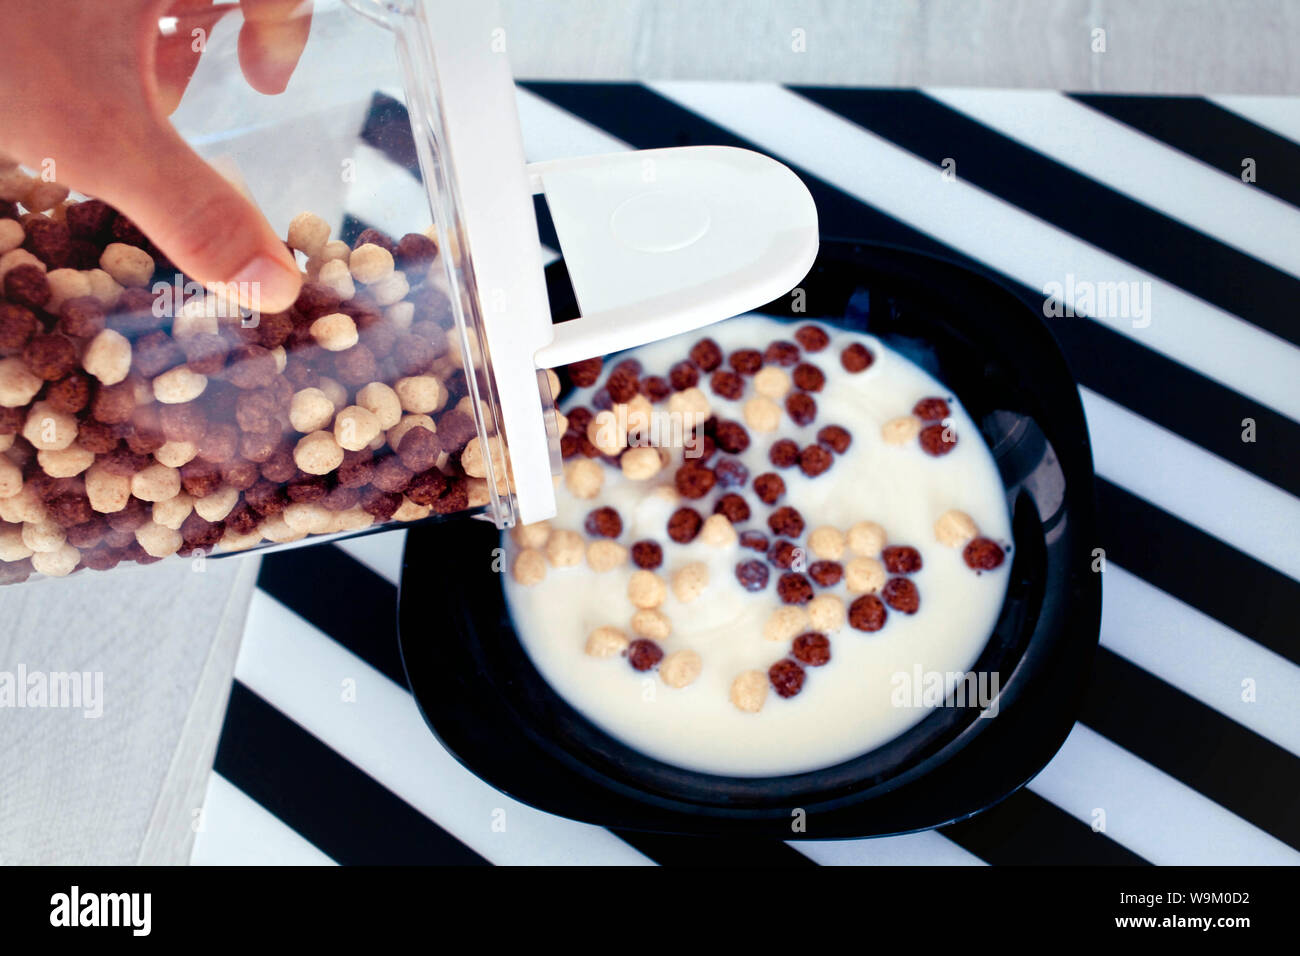 female hand fills from the container chocolate cereal and corn balls in a black plate with milk. Stock Photo